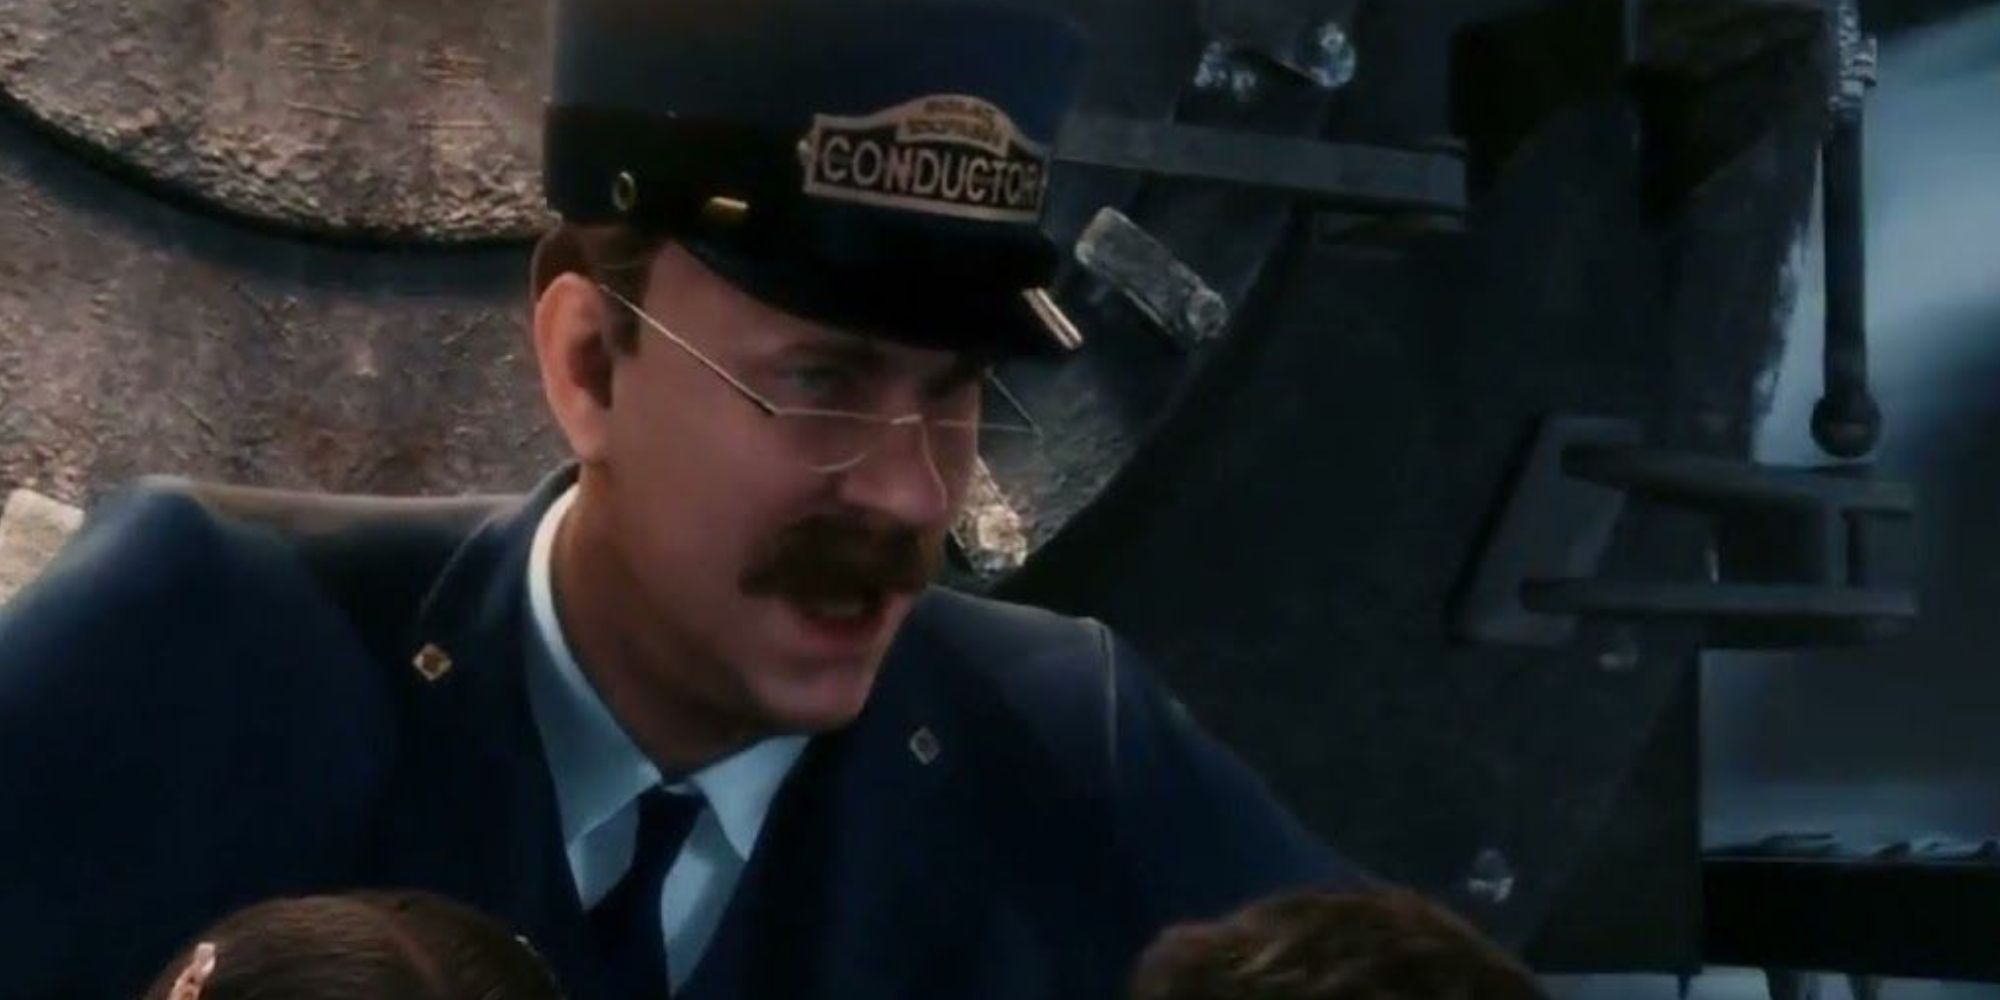 The Conductor in The Polar Express